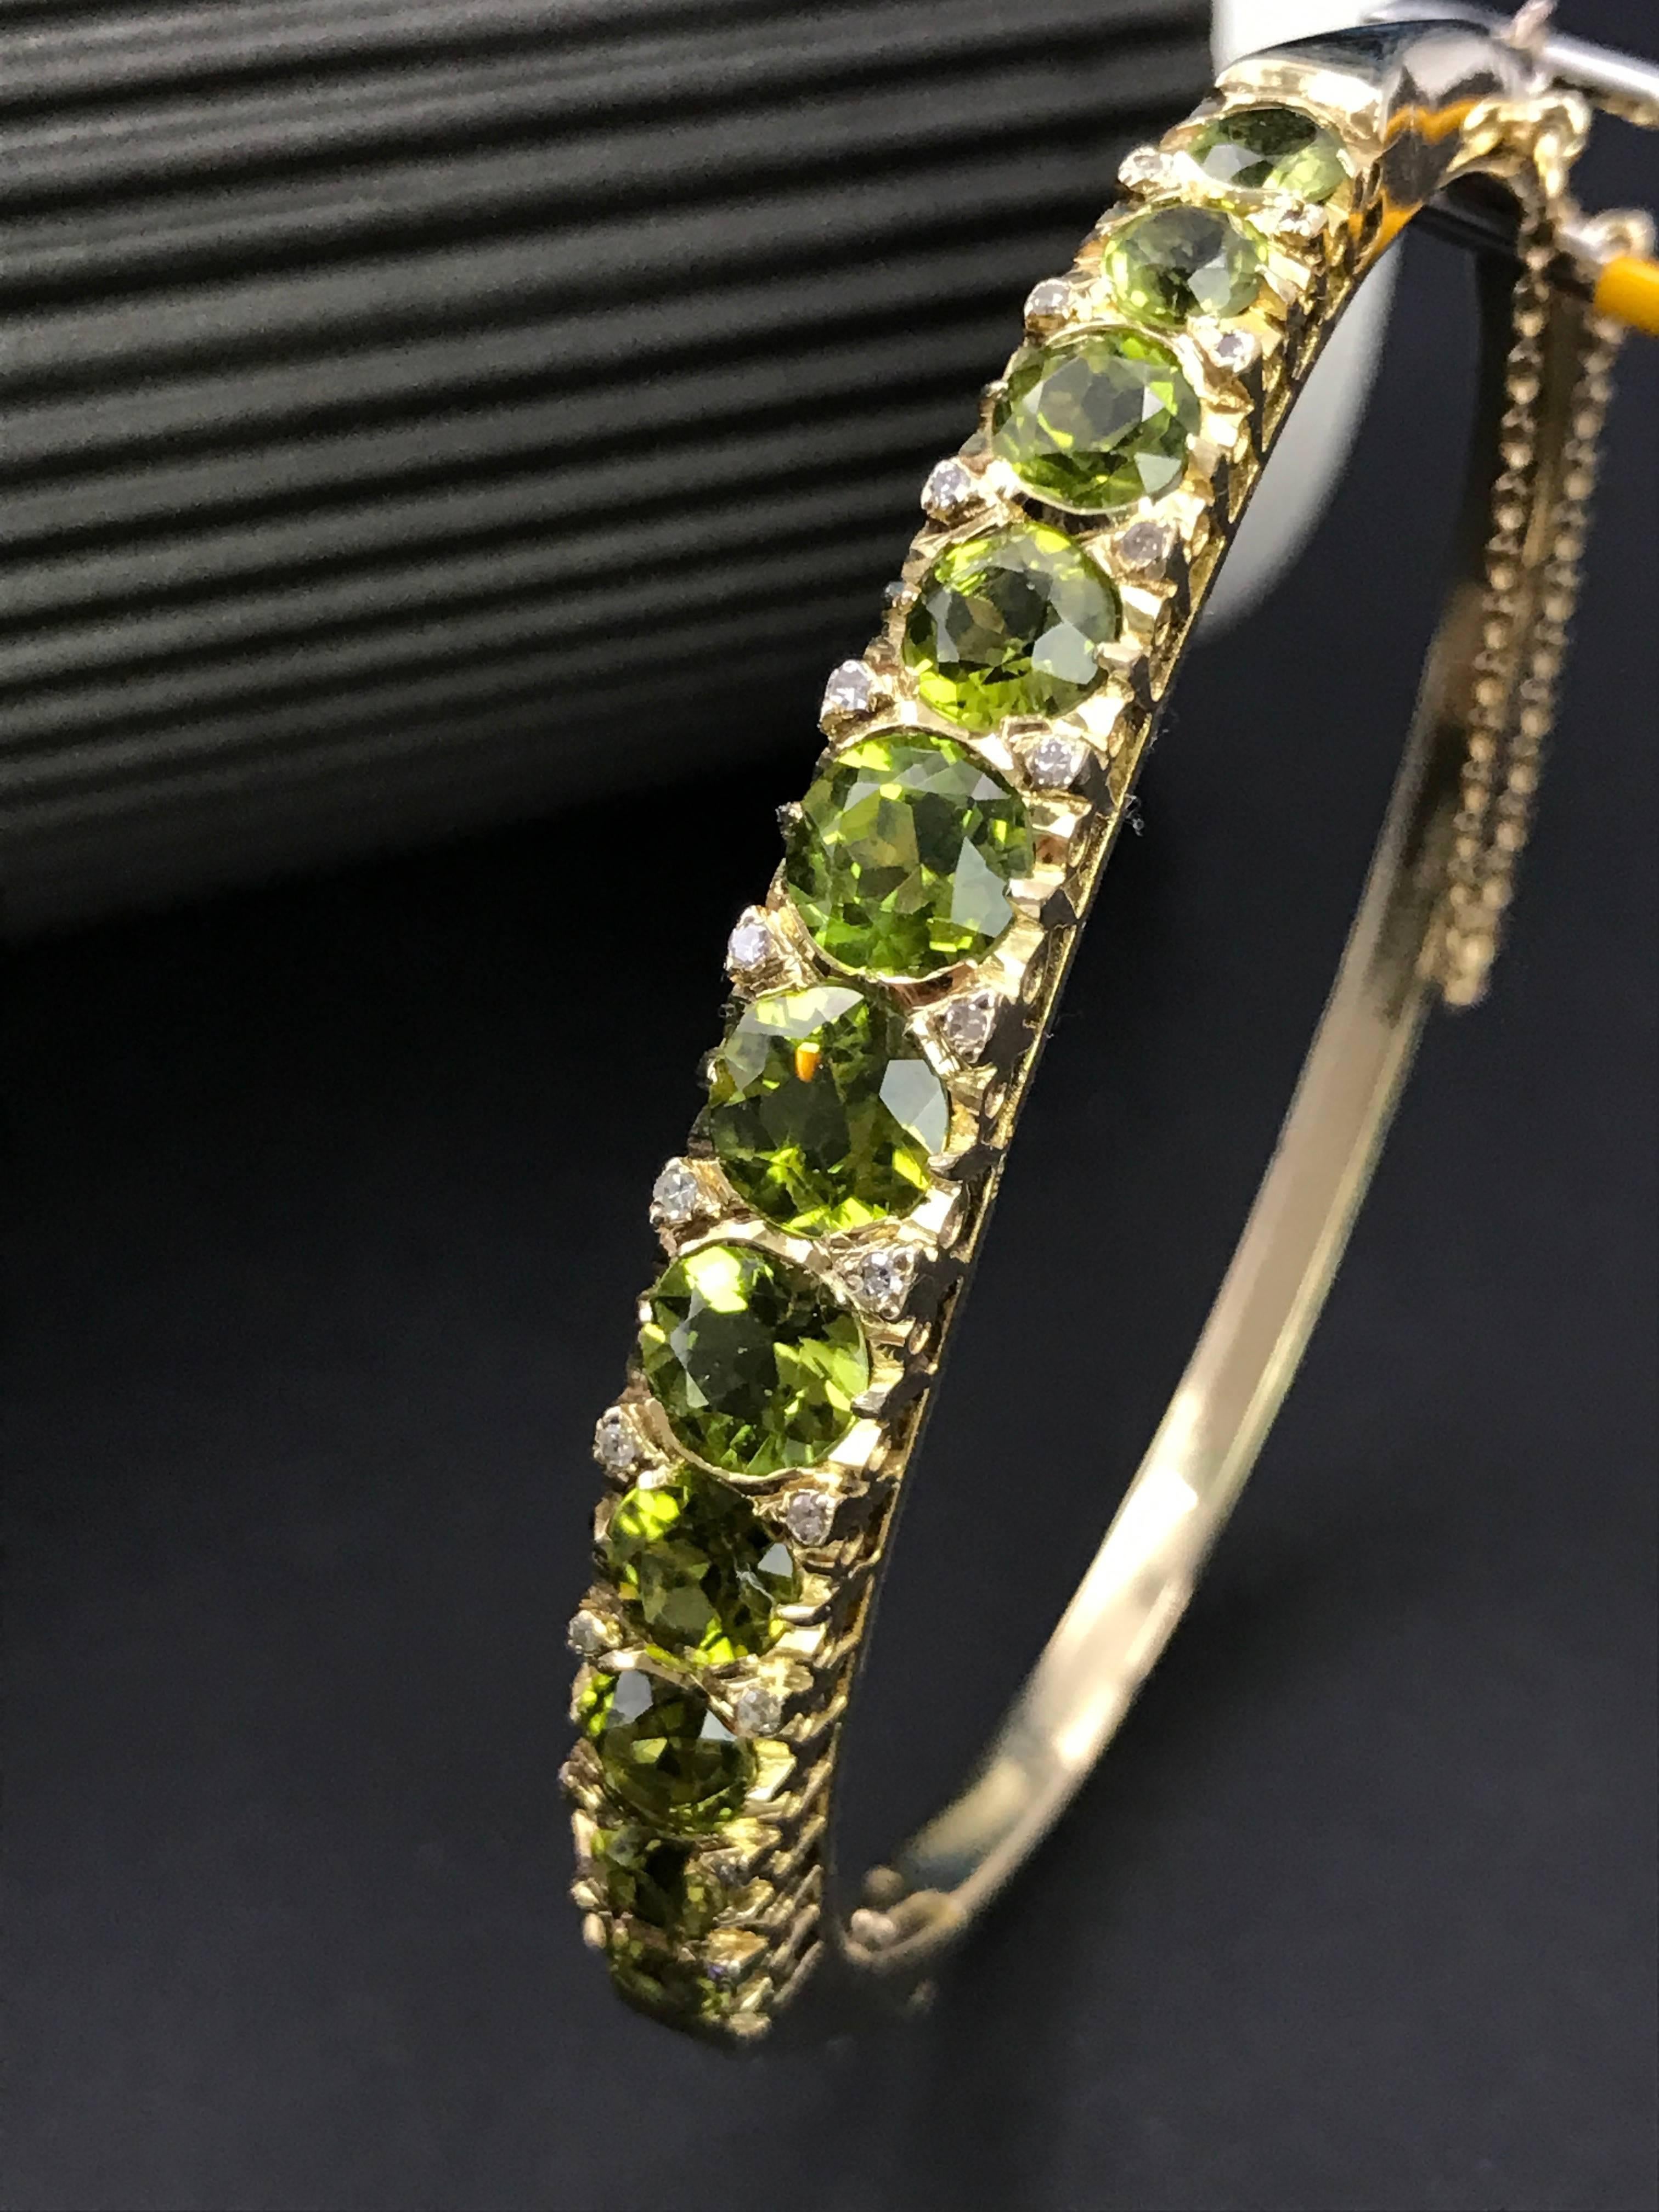 A Victorian 9 karat gold hinged bangle bracelet with peridot and diamonds. The bangle bracelet has 11 peridots with an approximate total weight of 5.3 carats set in a graduated line, 20 brilliant cut diamonds with an approximate total weight 0.5